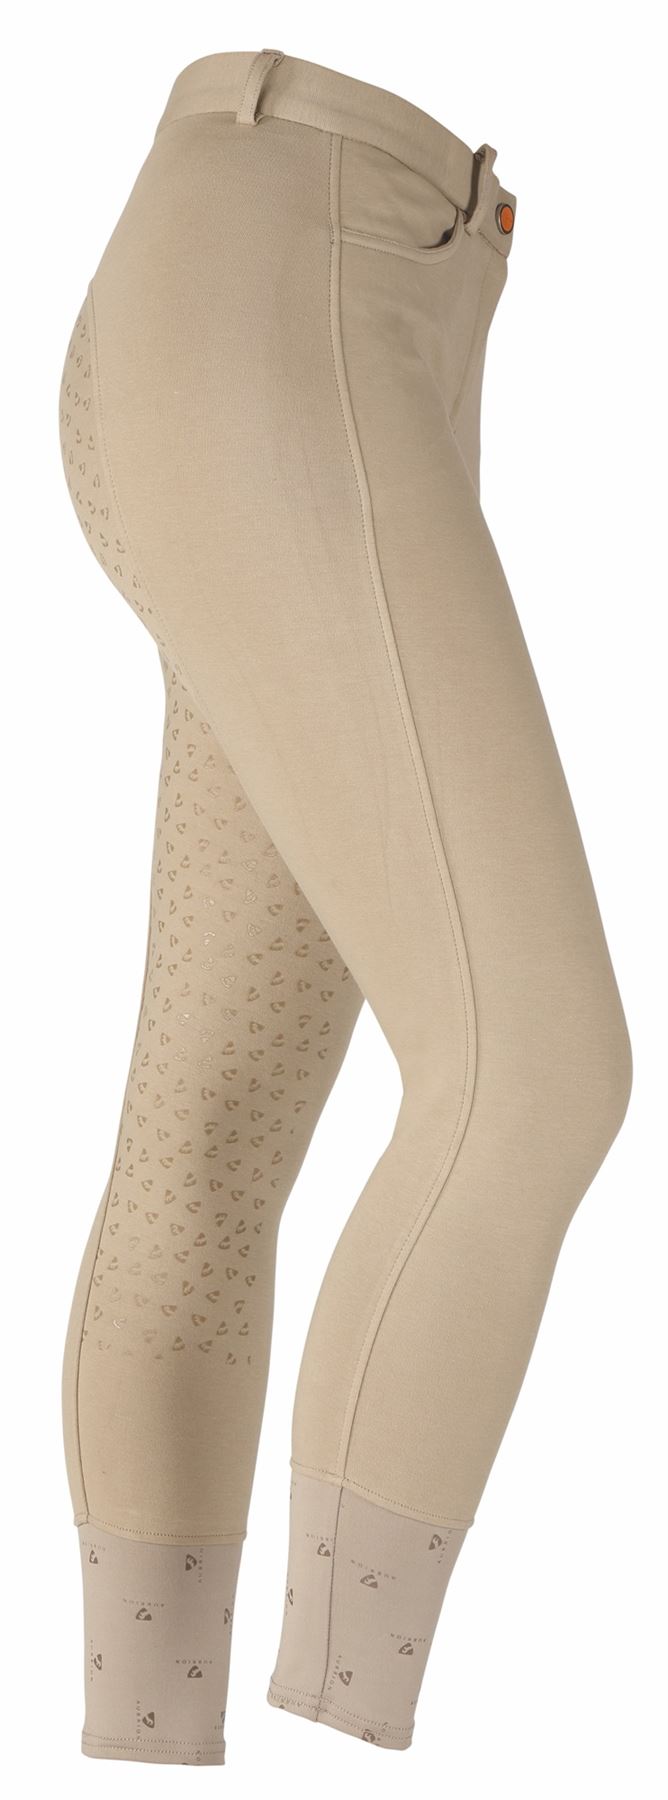 Shires Aubrion Northwick Breeches - Maids - Just Horse Riders